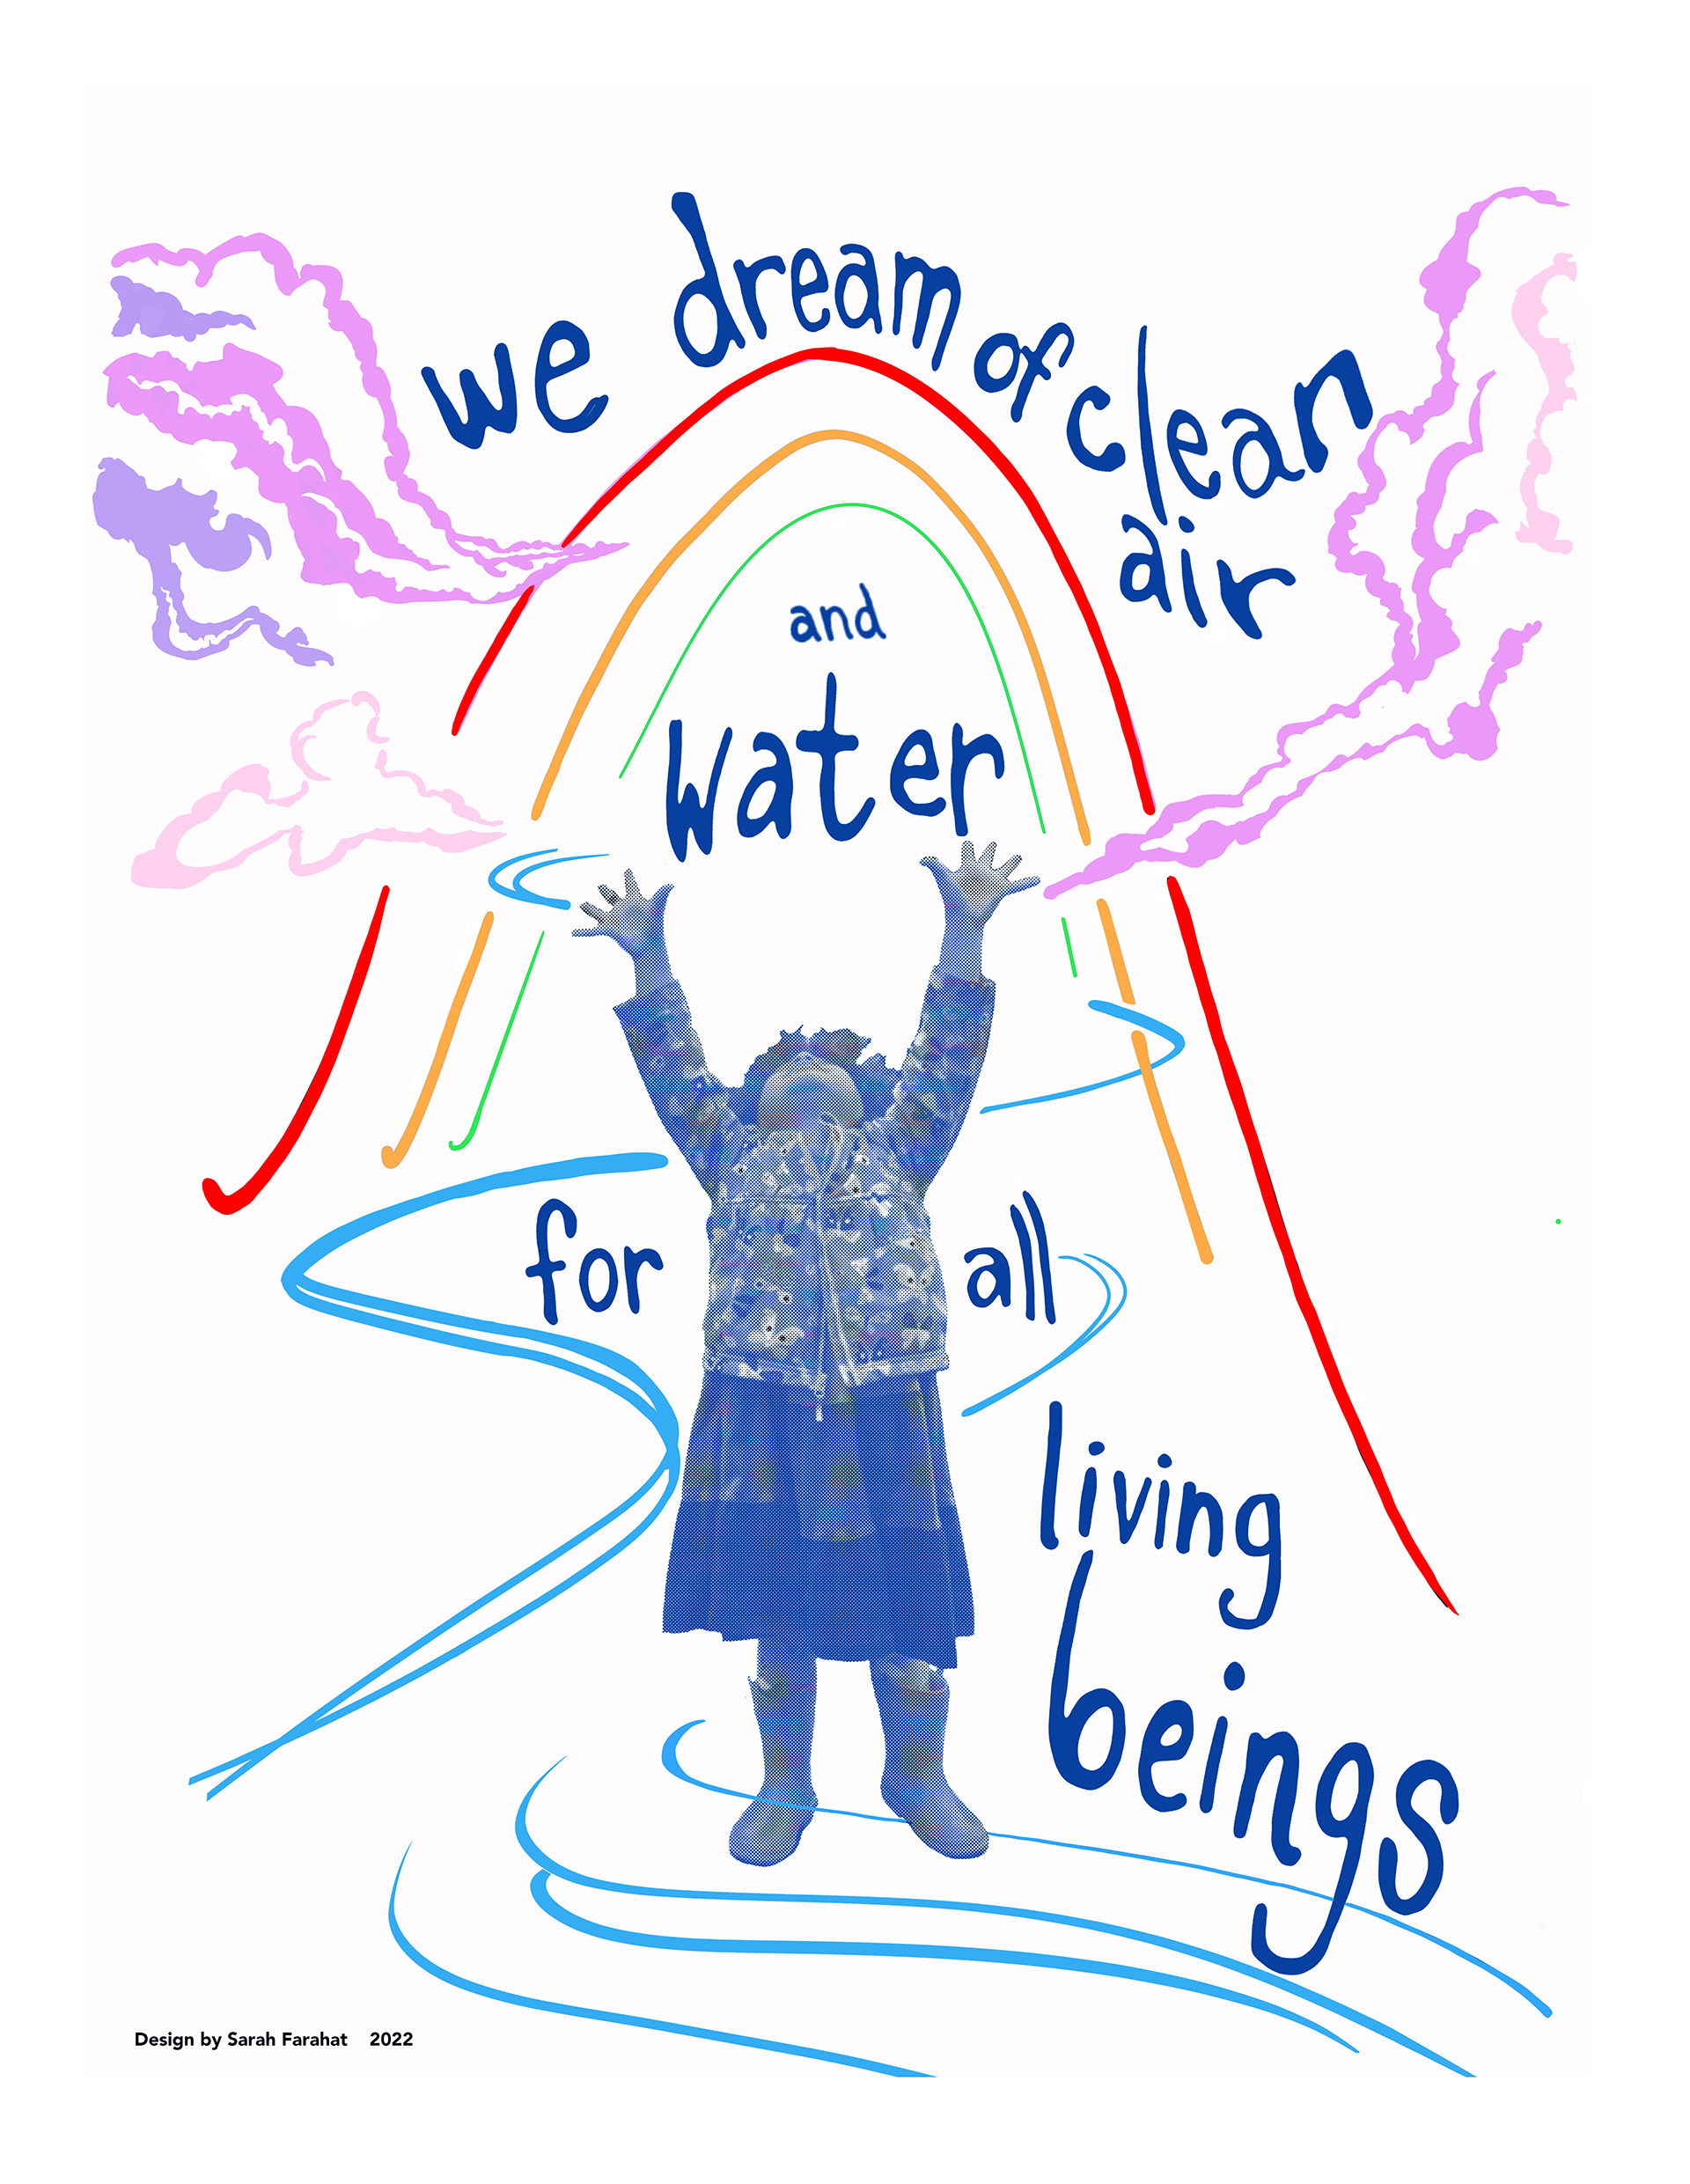 We Dream of Clean Air and Water for all Living Beings
Screenprint/digital print, dimensions variable, 2022

Designed for the National Resource Defense Council
